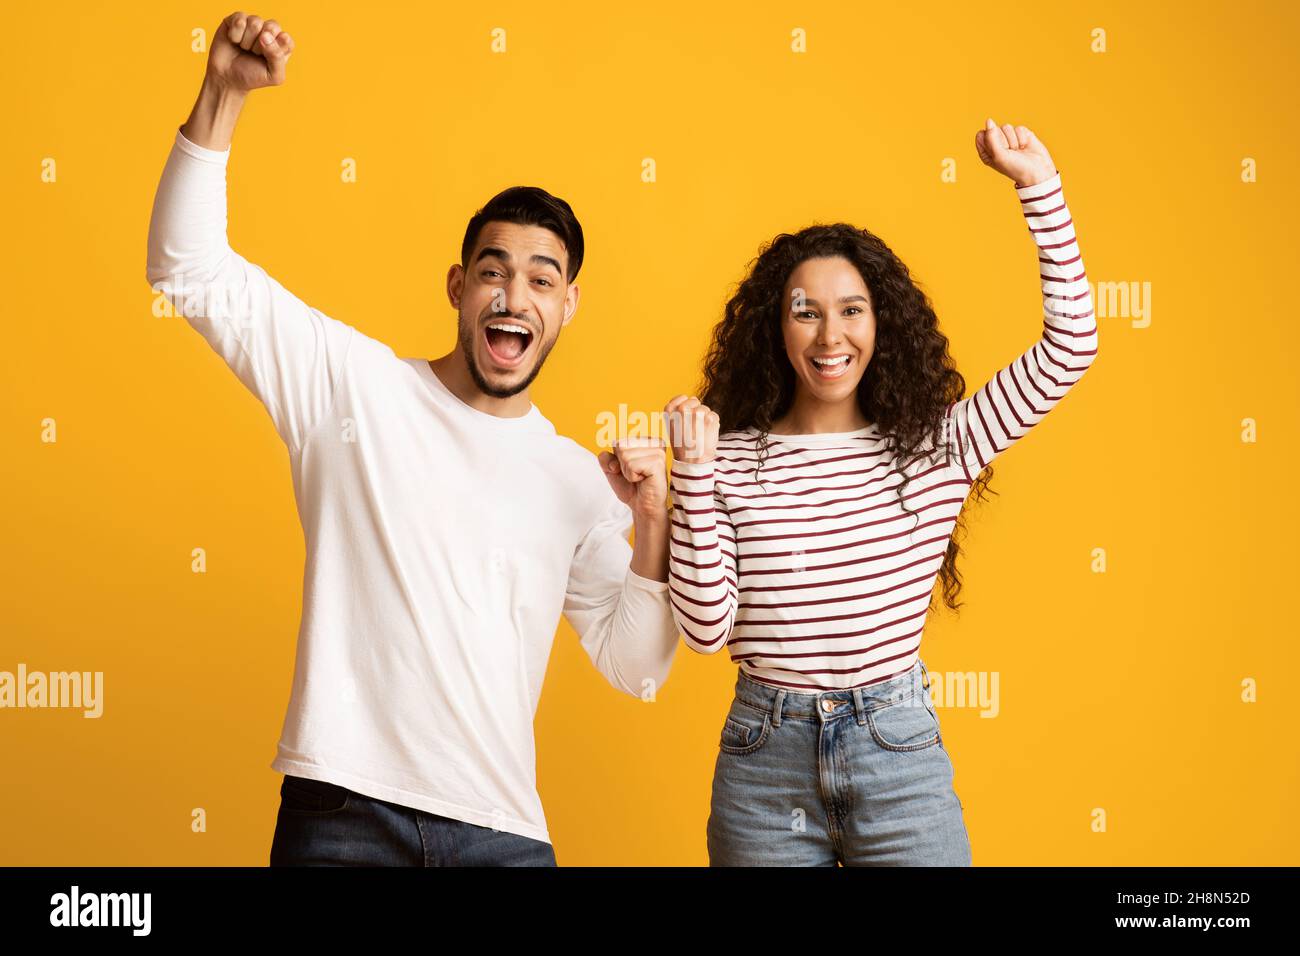 Lucky Winners. Cheerful Excited Middle Eastern Couple Celebrating Success With Raised Fists Stock Photo